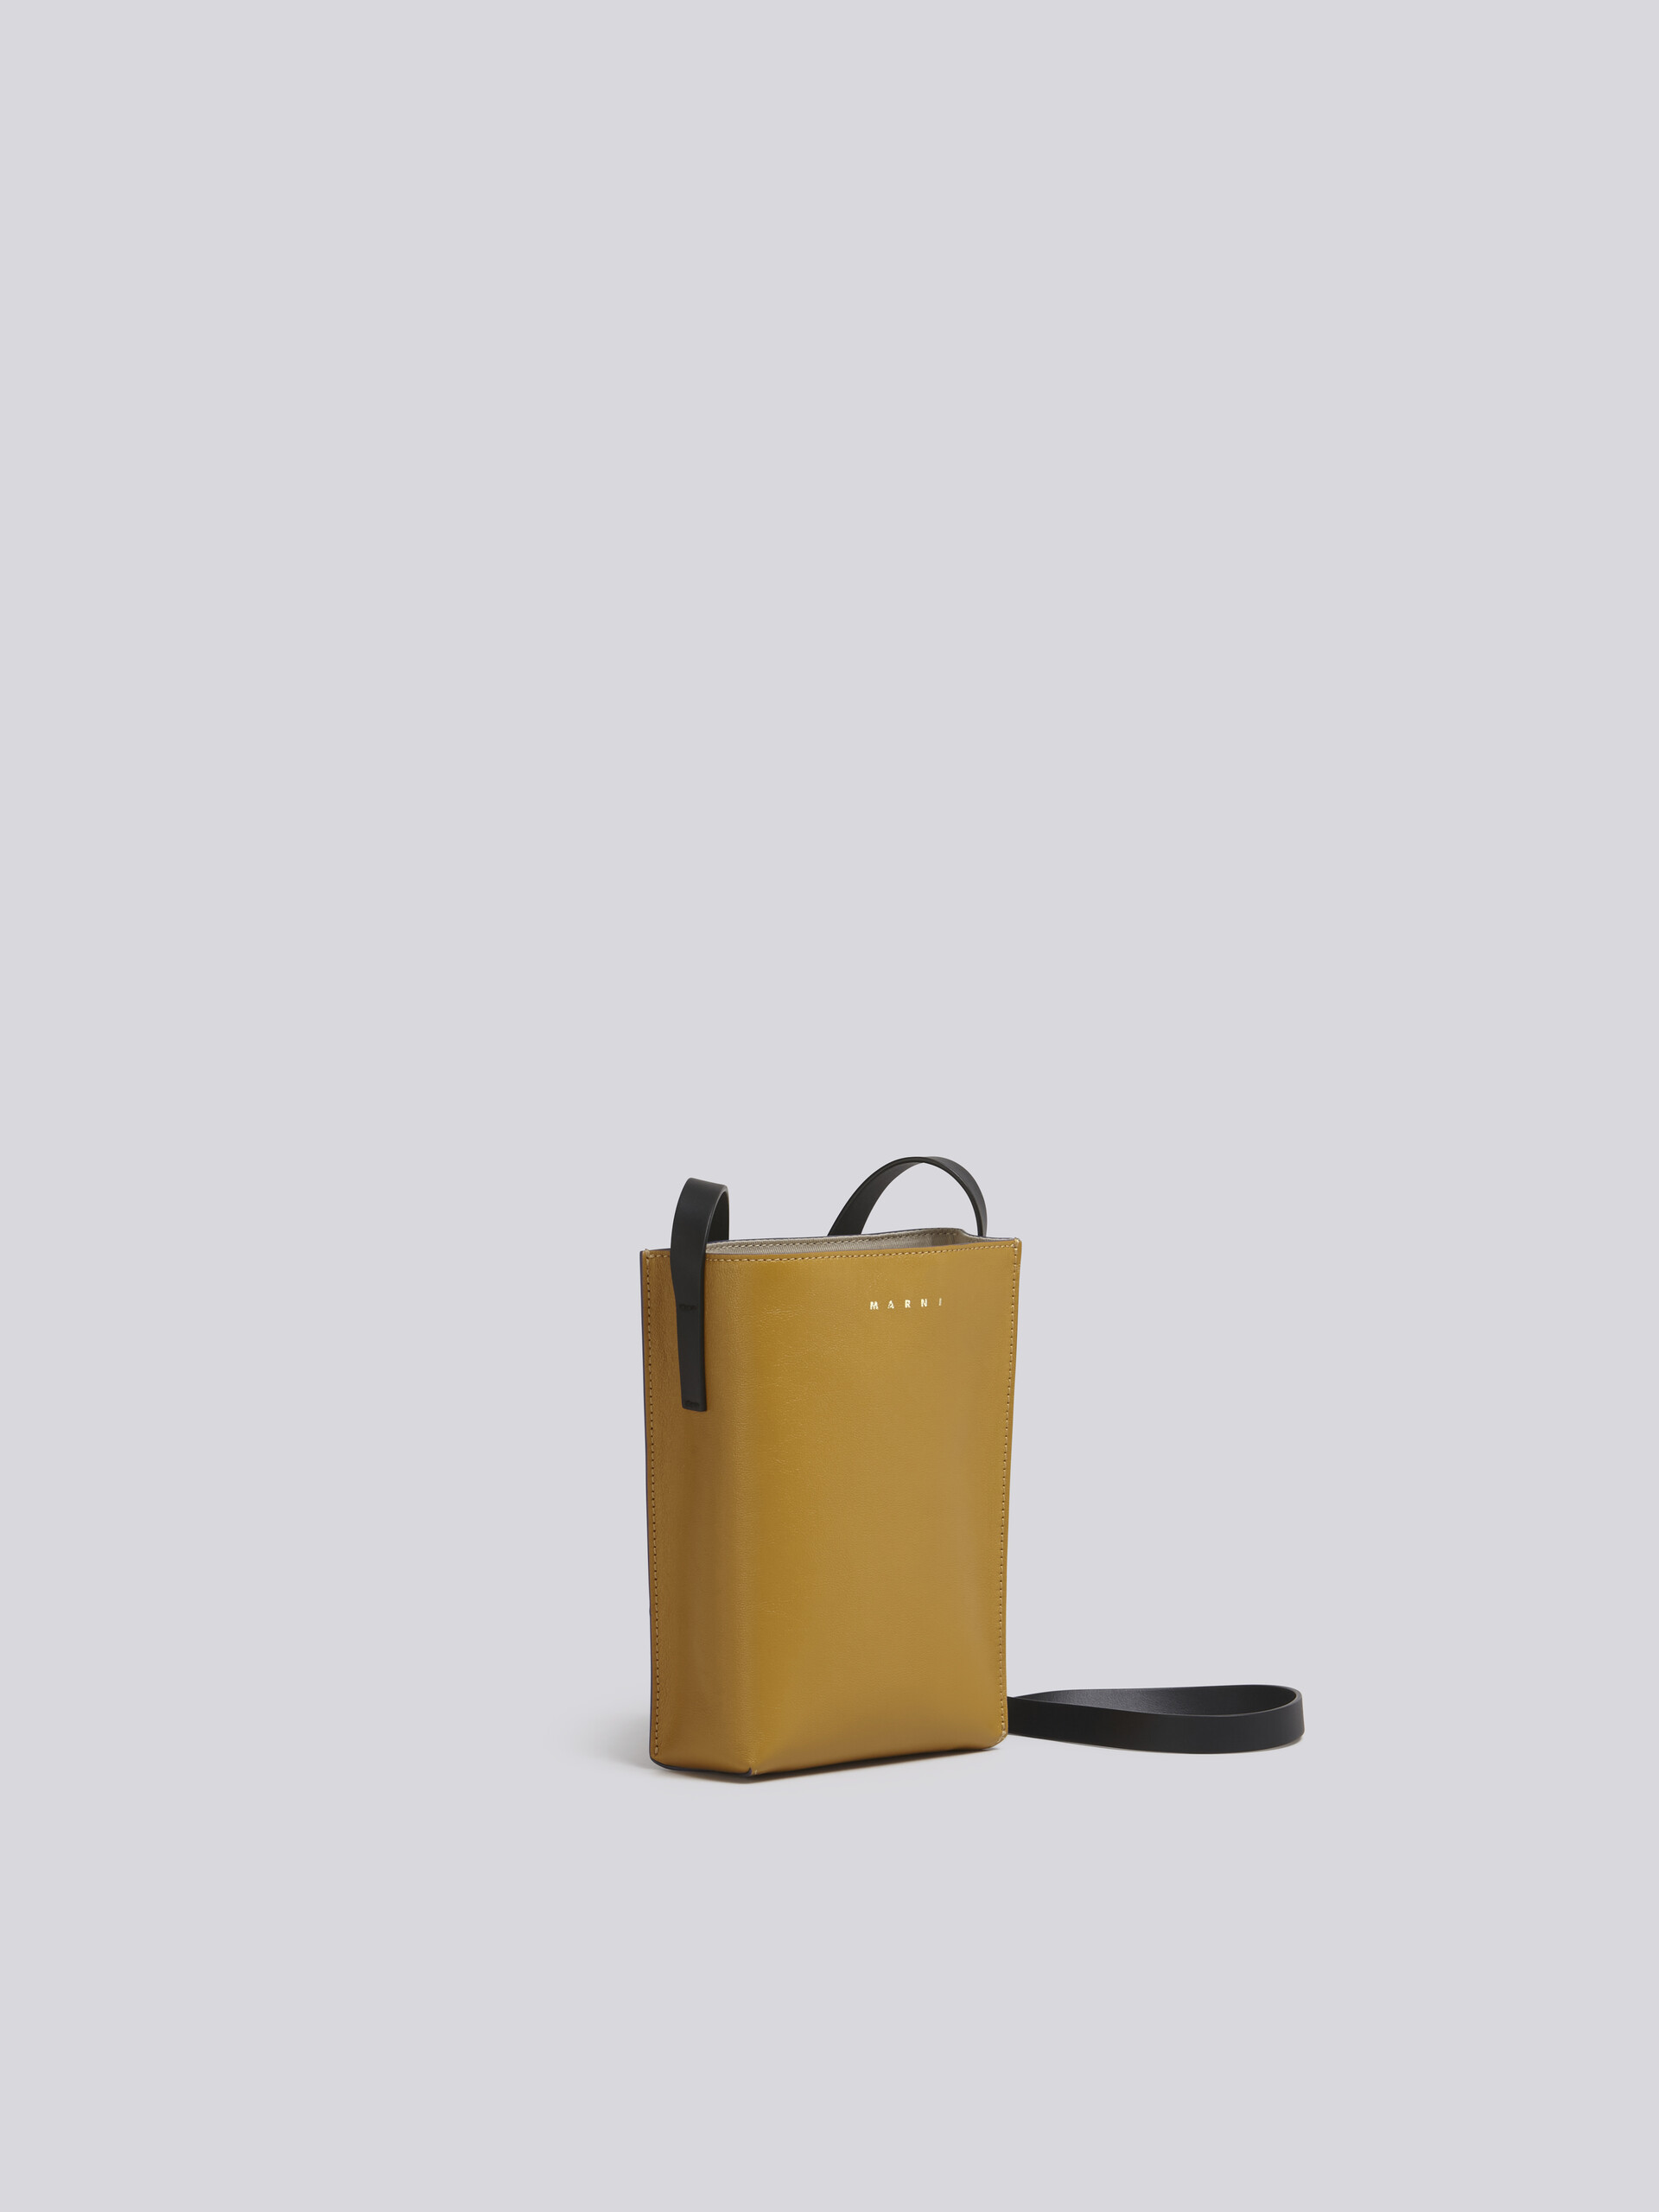 MUSEO SOFT bag in yellow and green tumbled calf - Shoulder Bags - Image 4